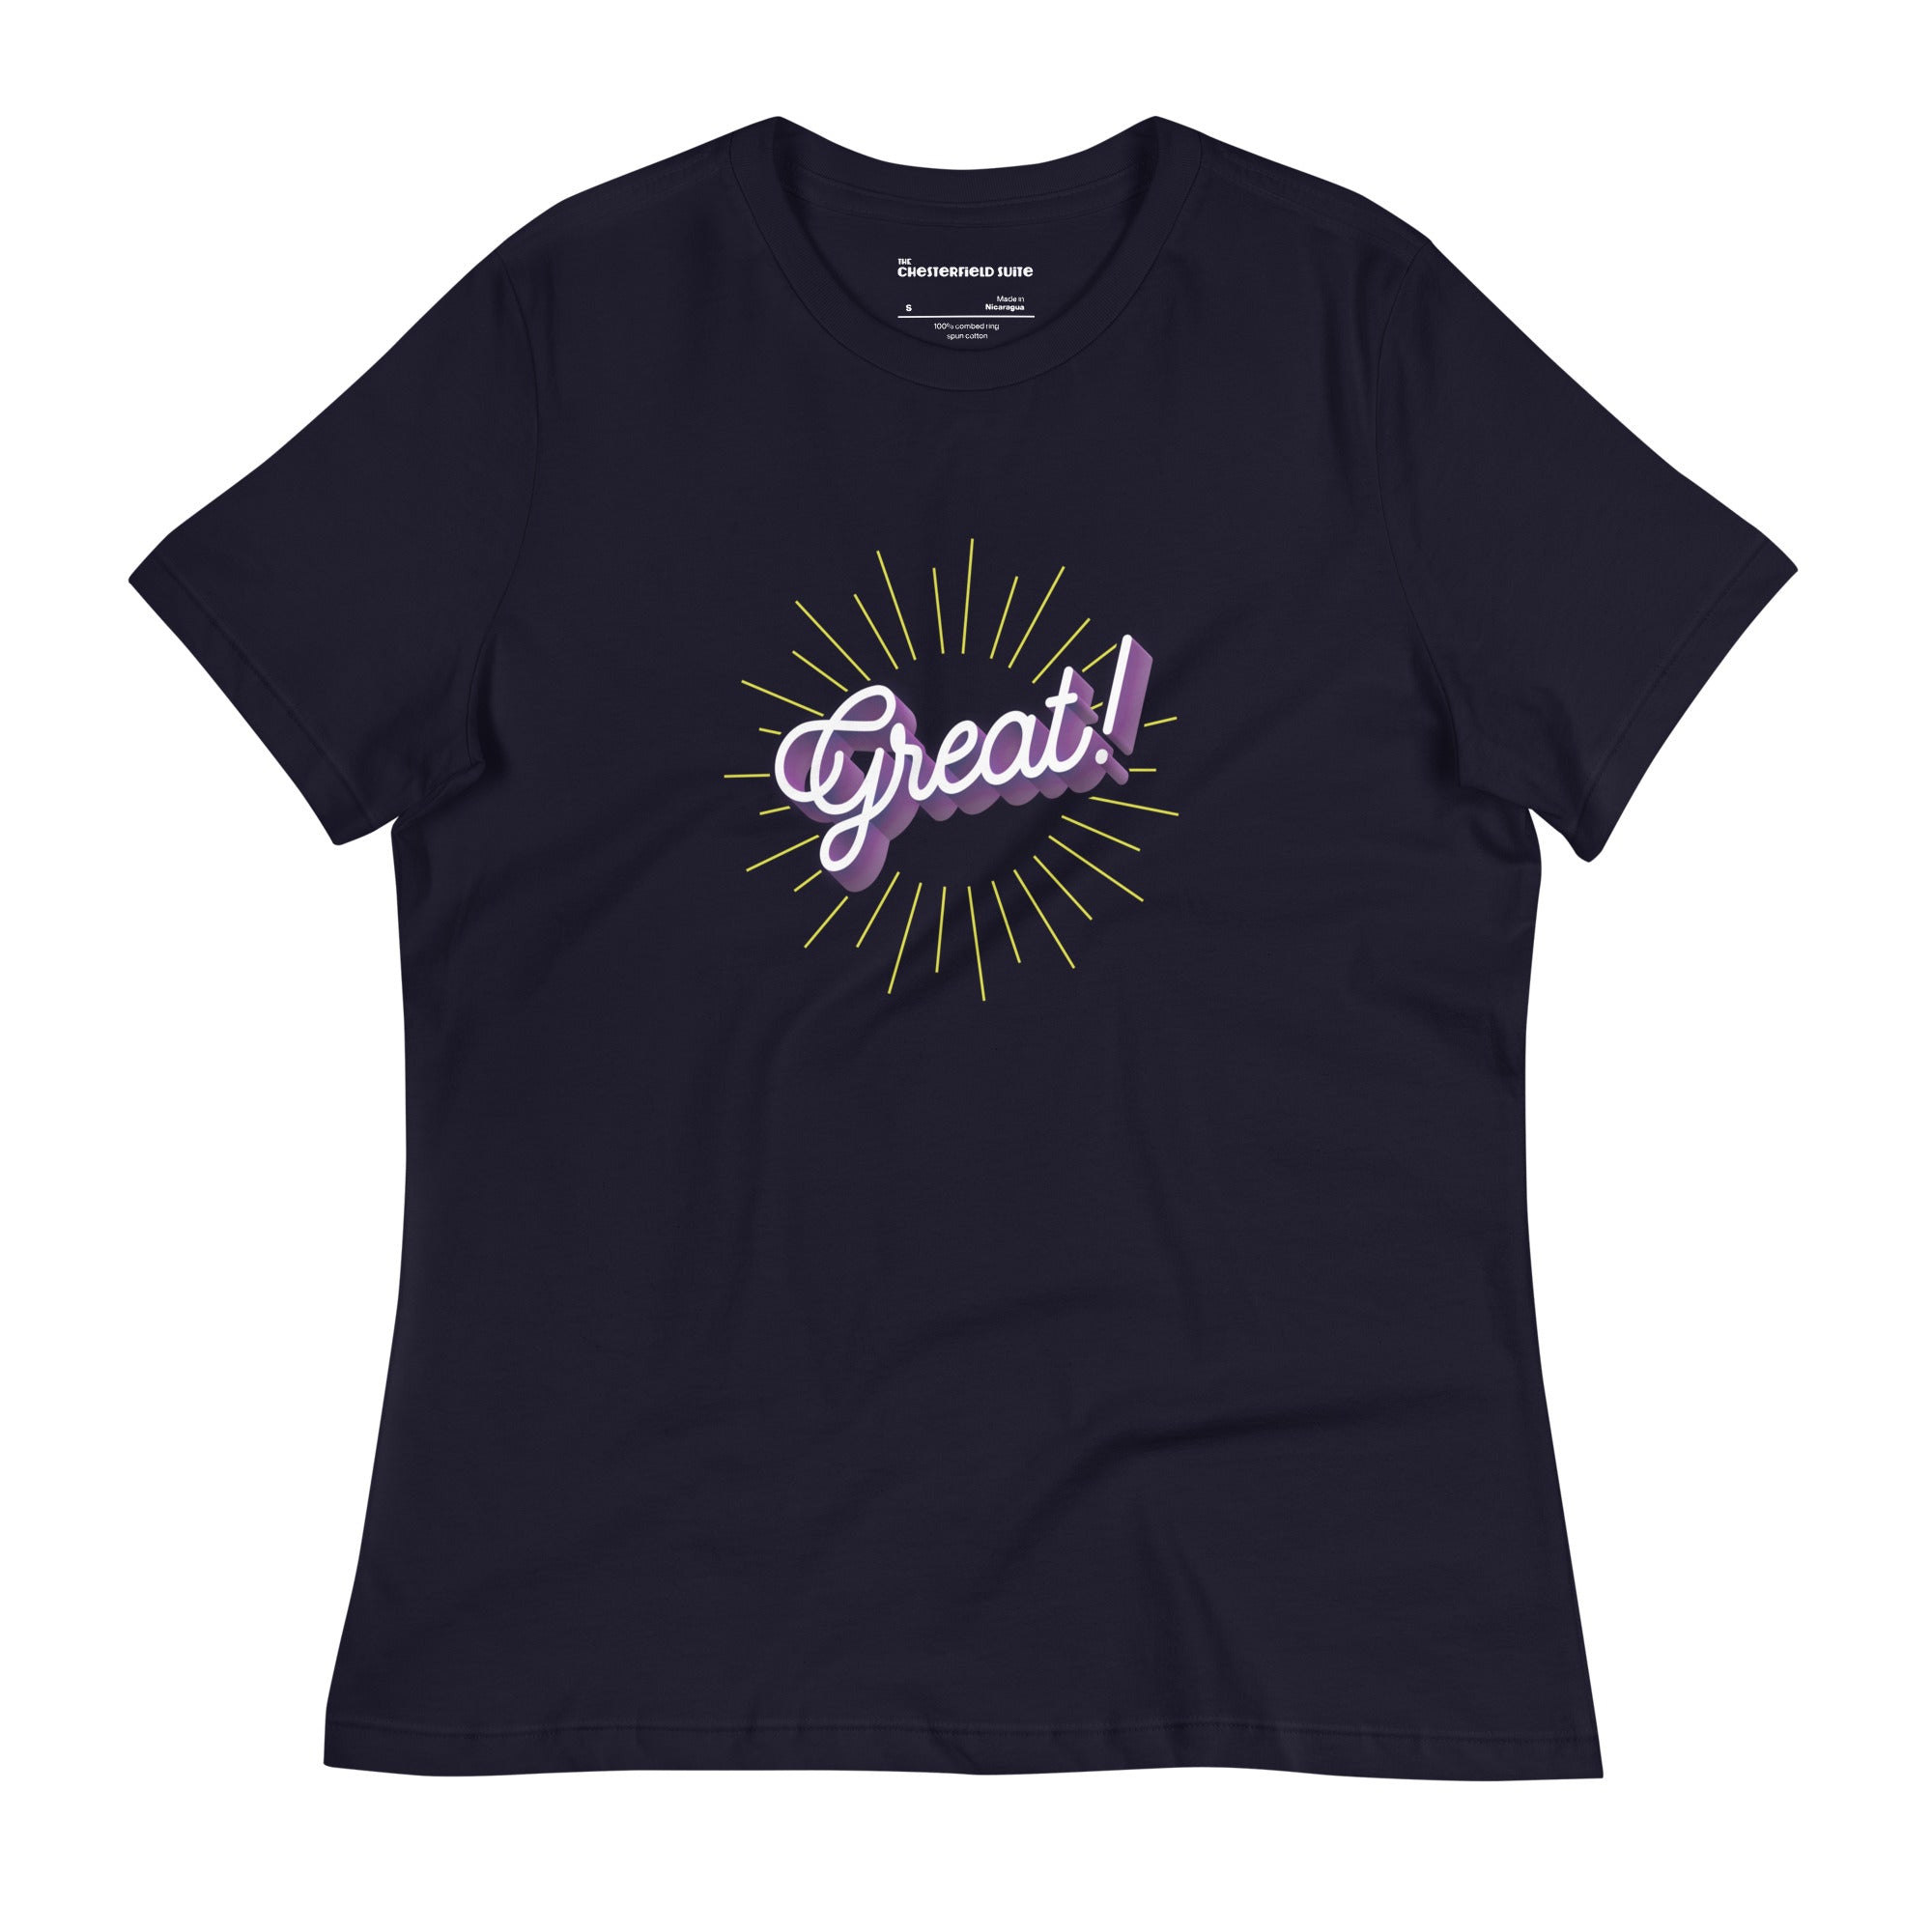 The word great! in cursive on navy blue women's t-shirt